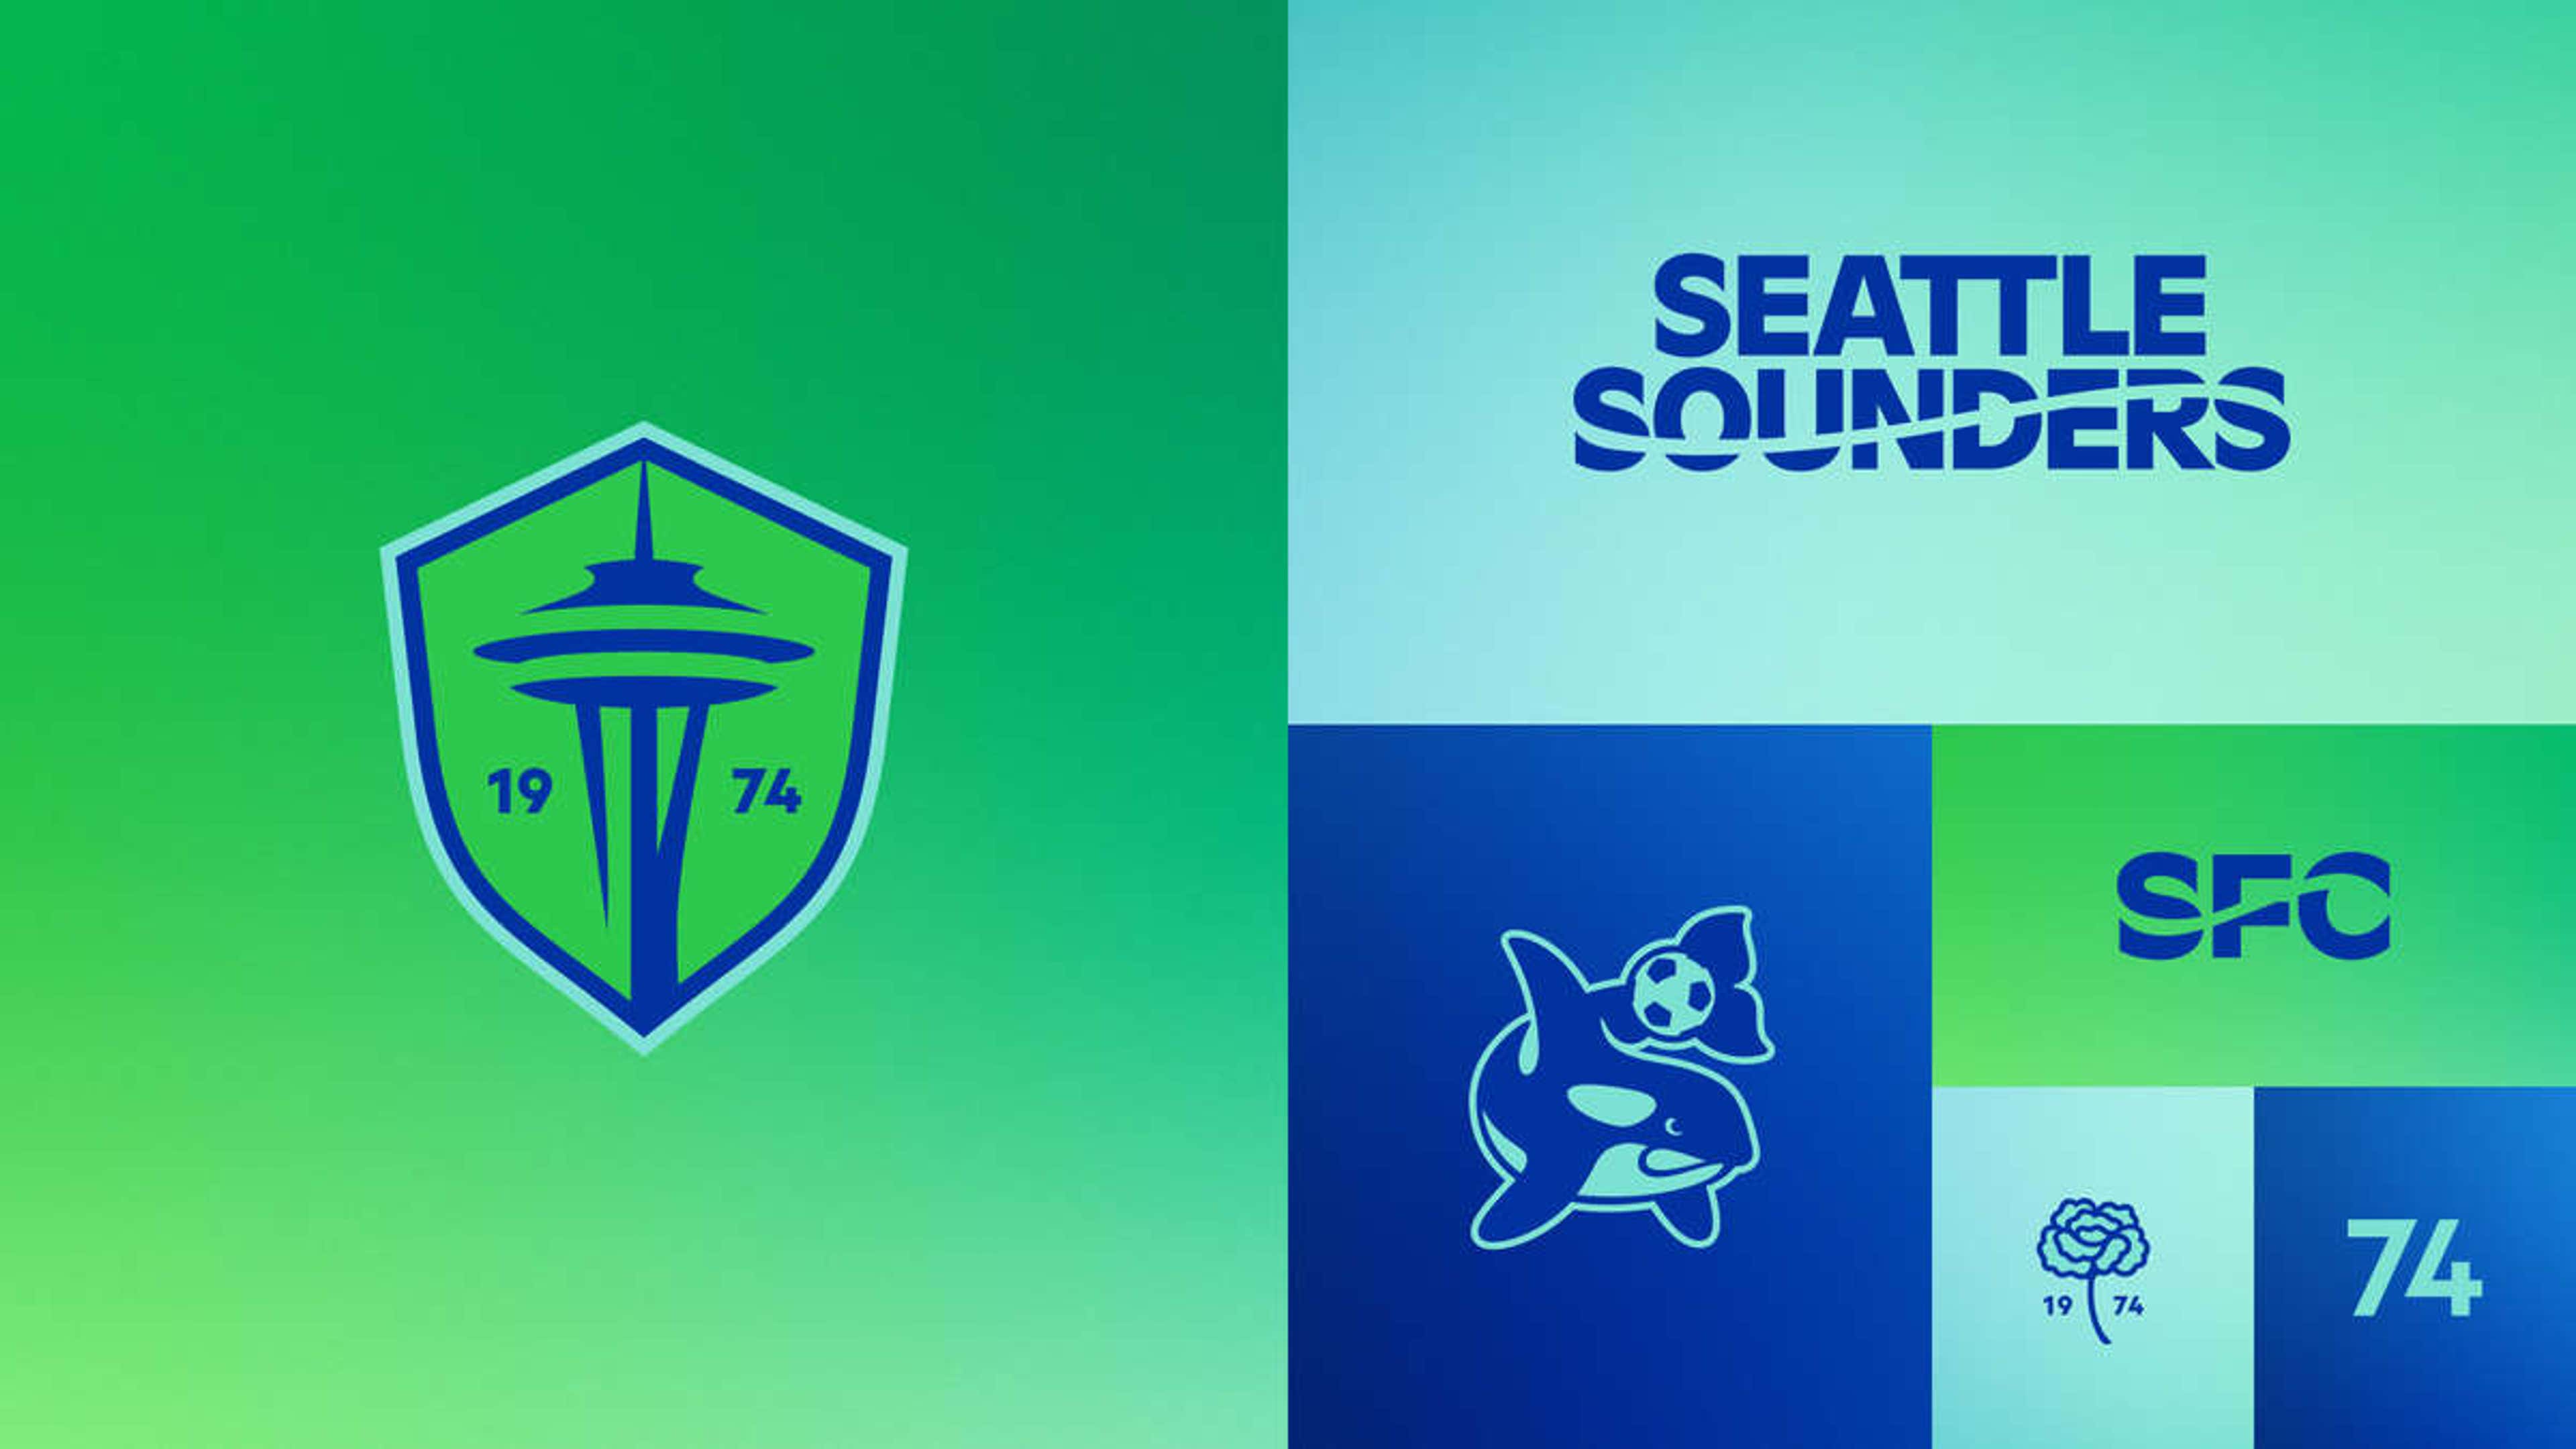 Seattle sounders re-brand